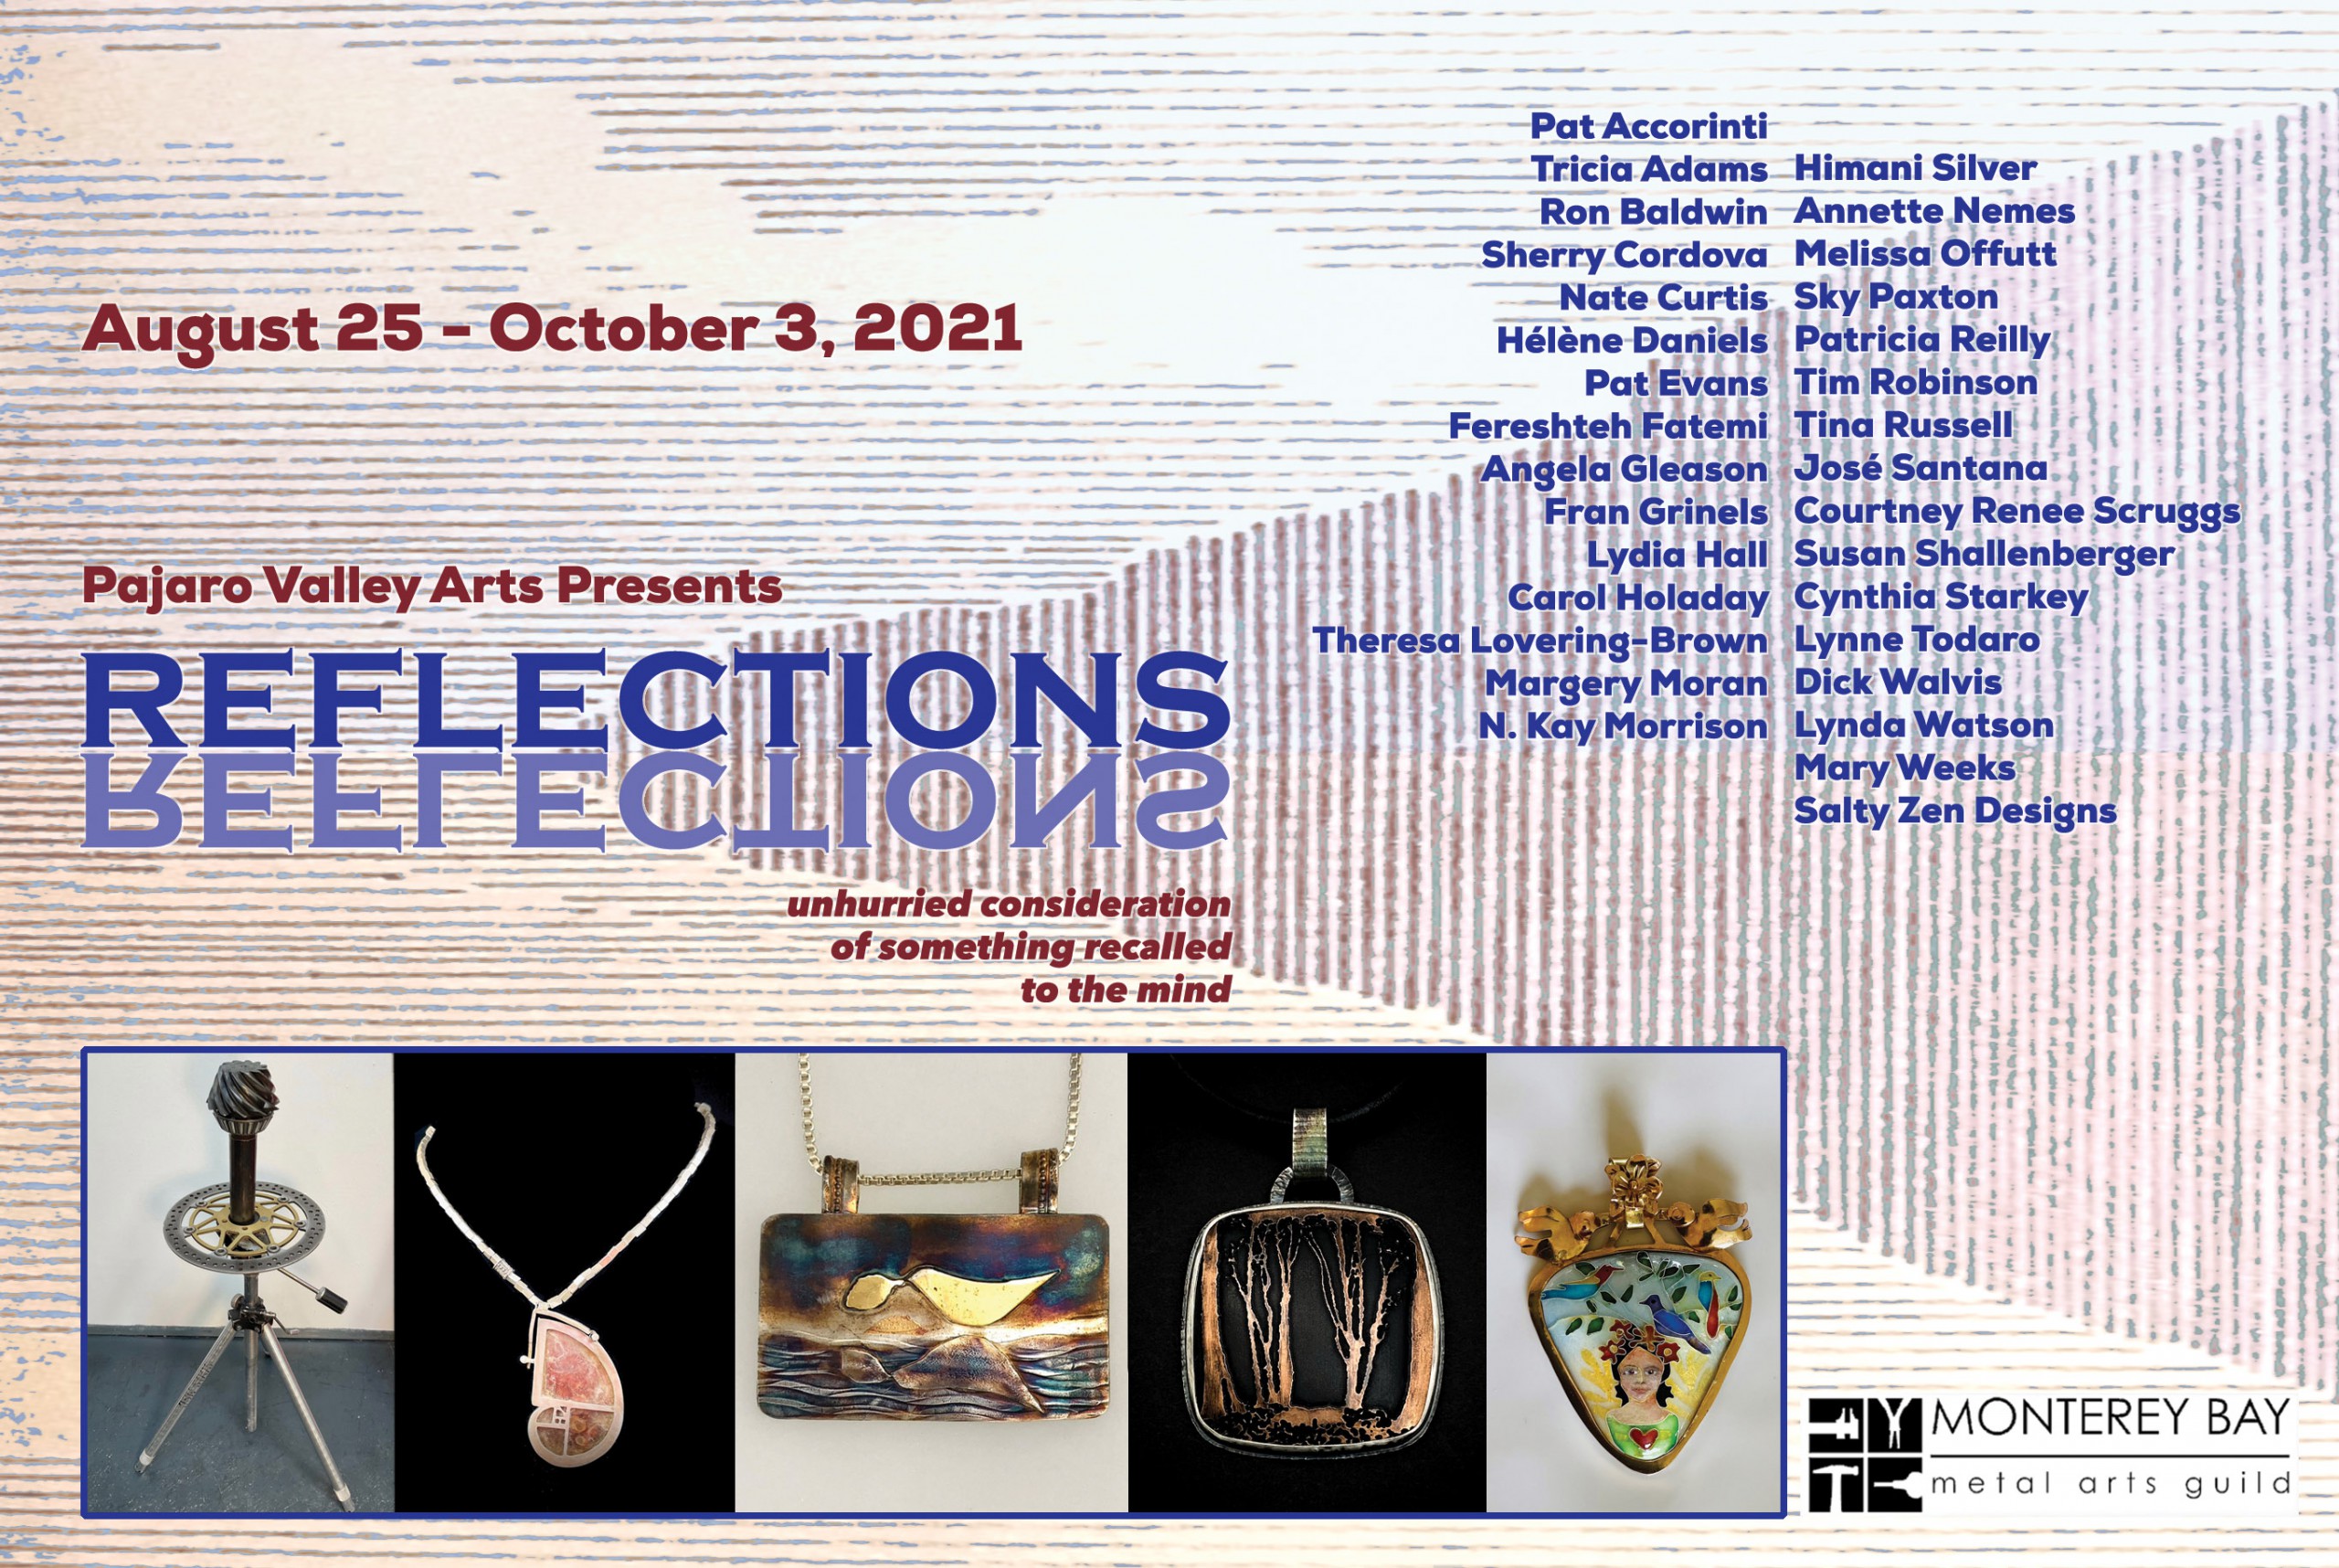 “Reflections” All Member Exhibition & Sale 2021 at Pajaro Valley Arts